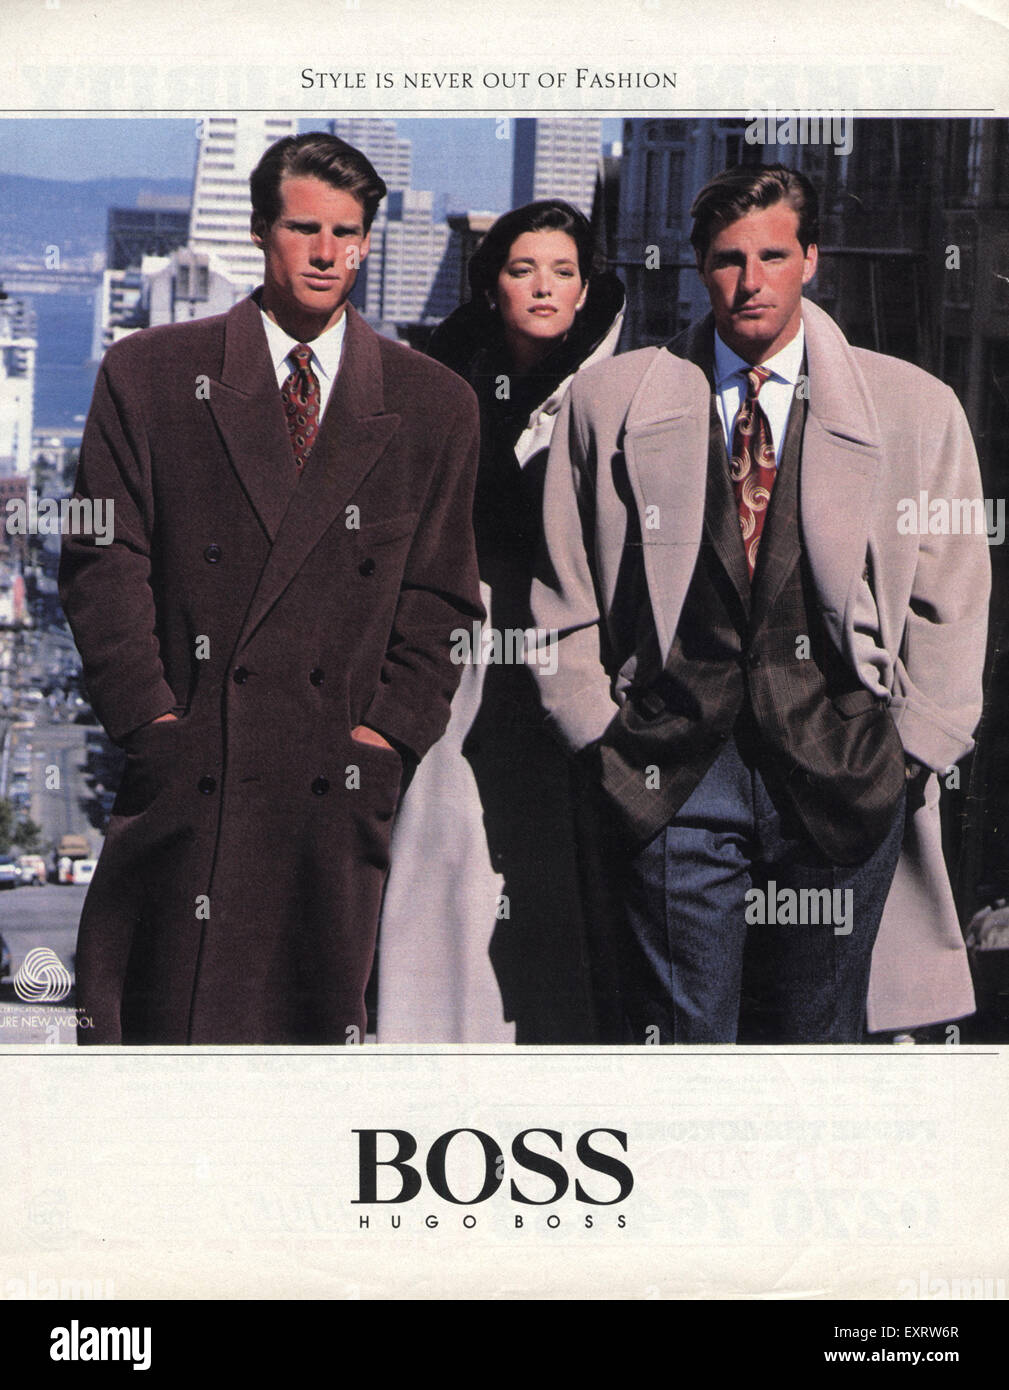 Hugo Boss 80s Fashion Style | vlr.eng.br